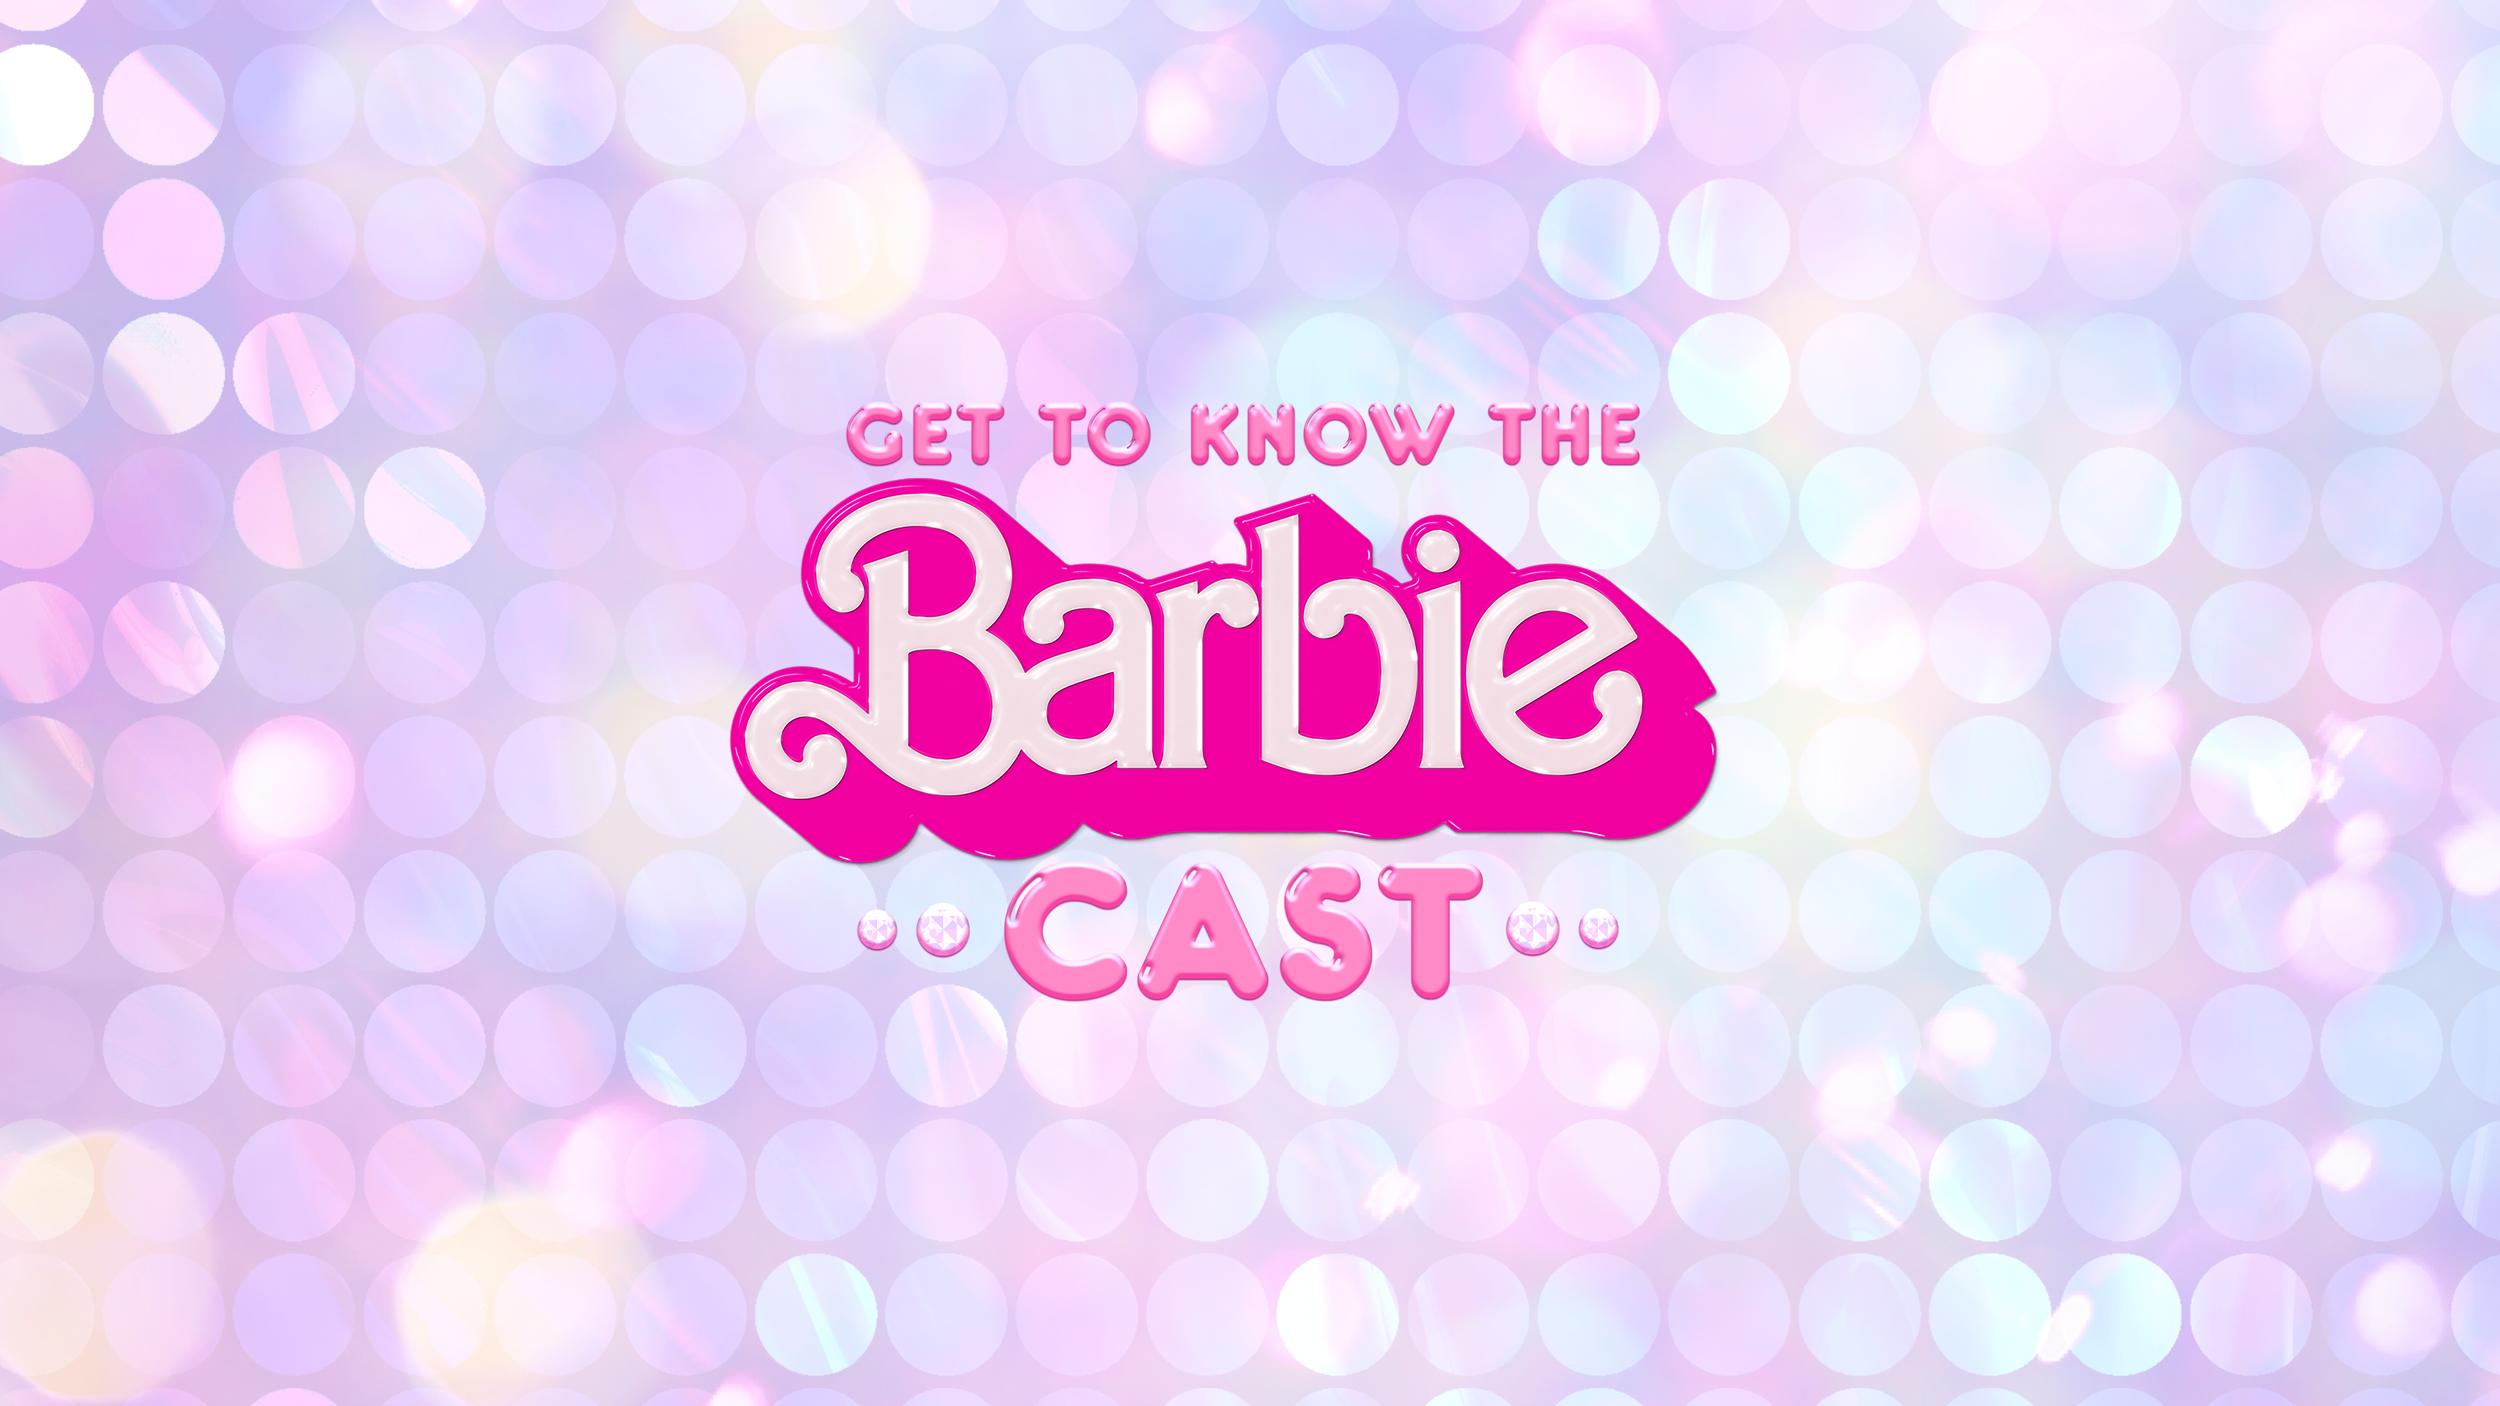 Brand-Barbie-Get to Know-GFX-TITLE CARD-OPTION 2-v6.4-min.png